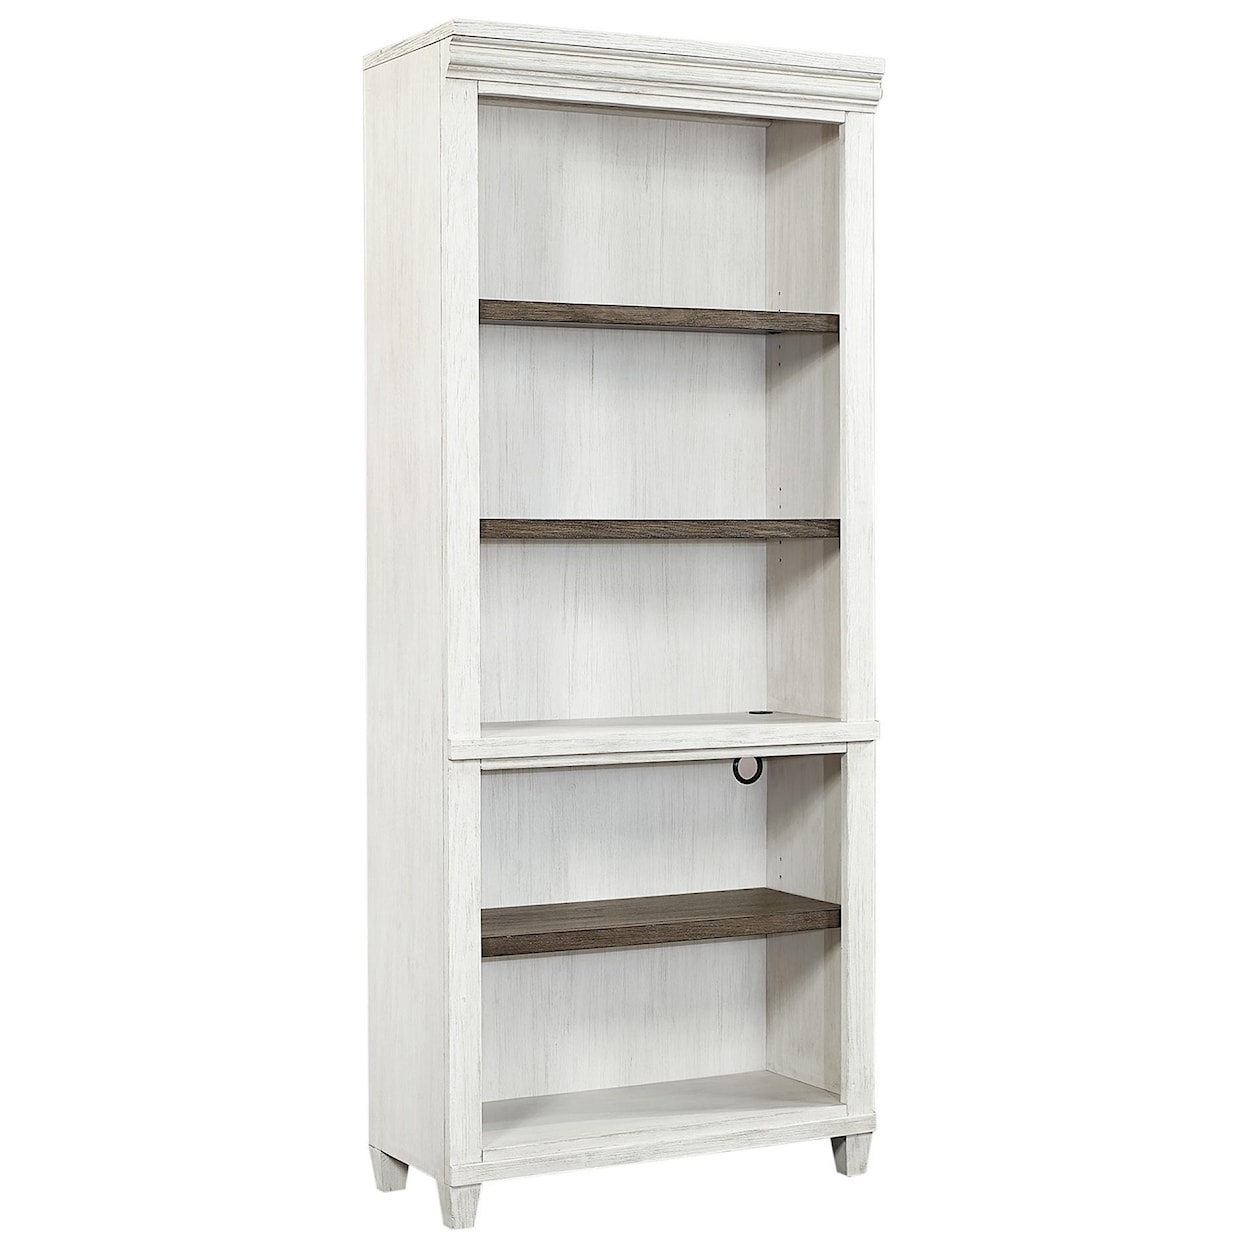 Aspenhome Caraway Bookcase with Open Storage